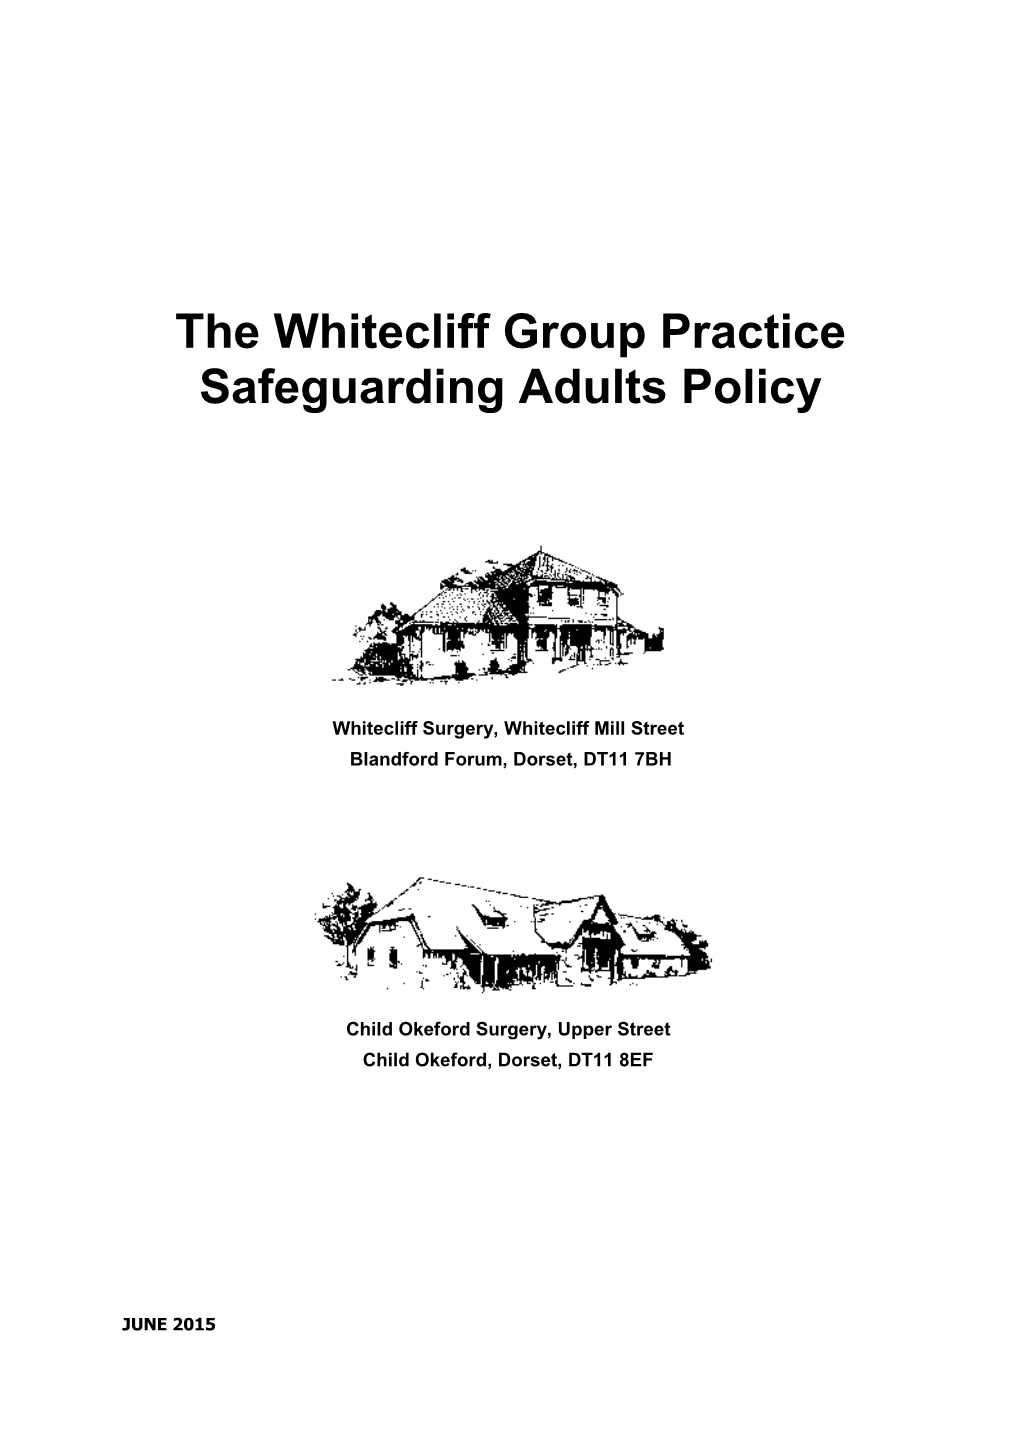 The Whitecliff Group Practice